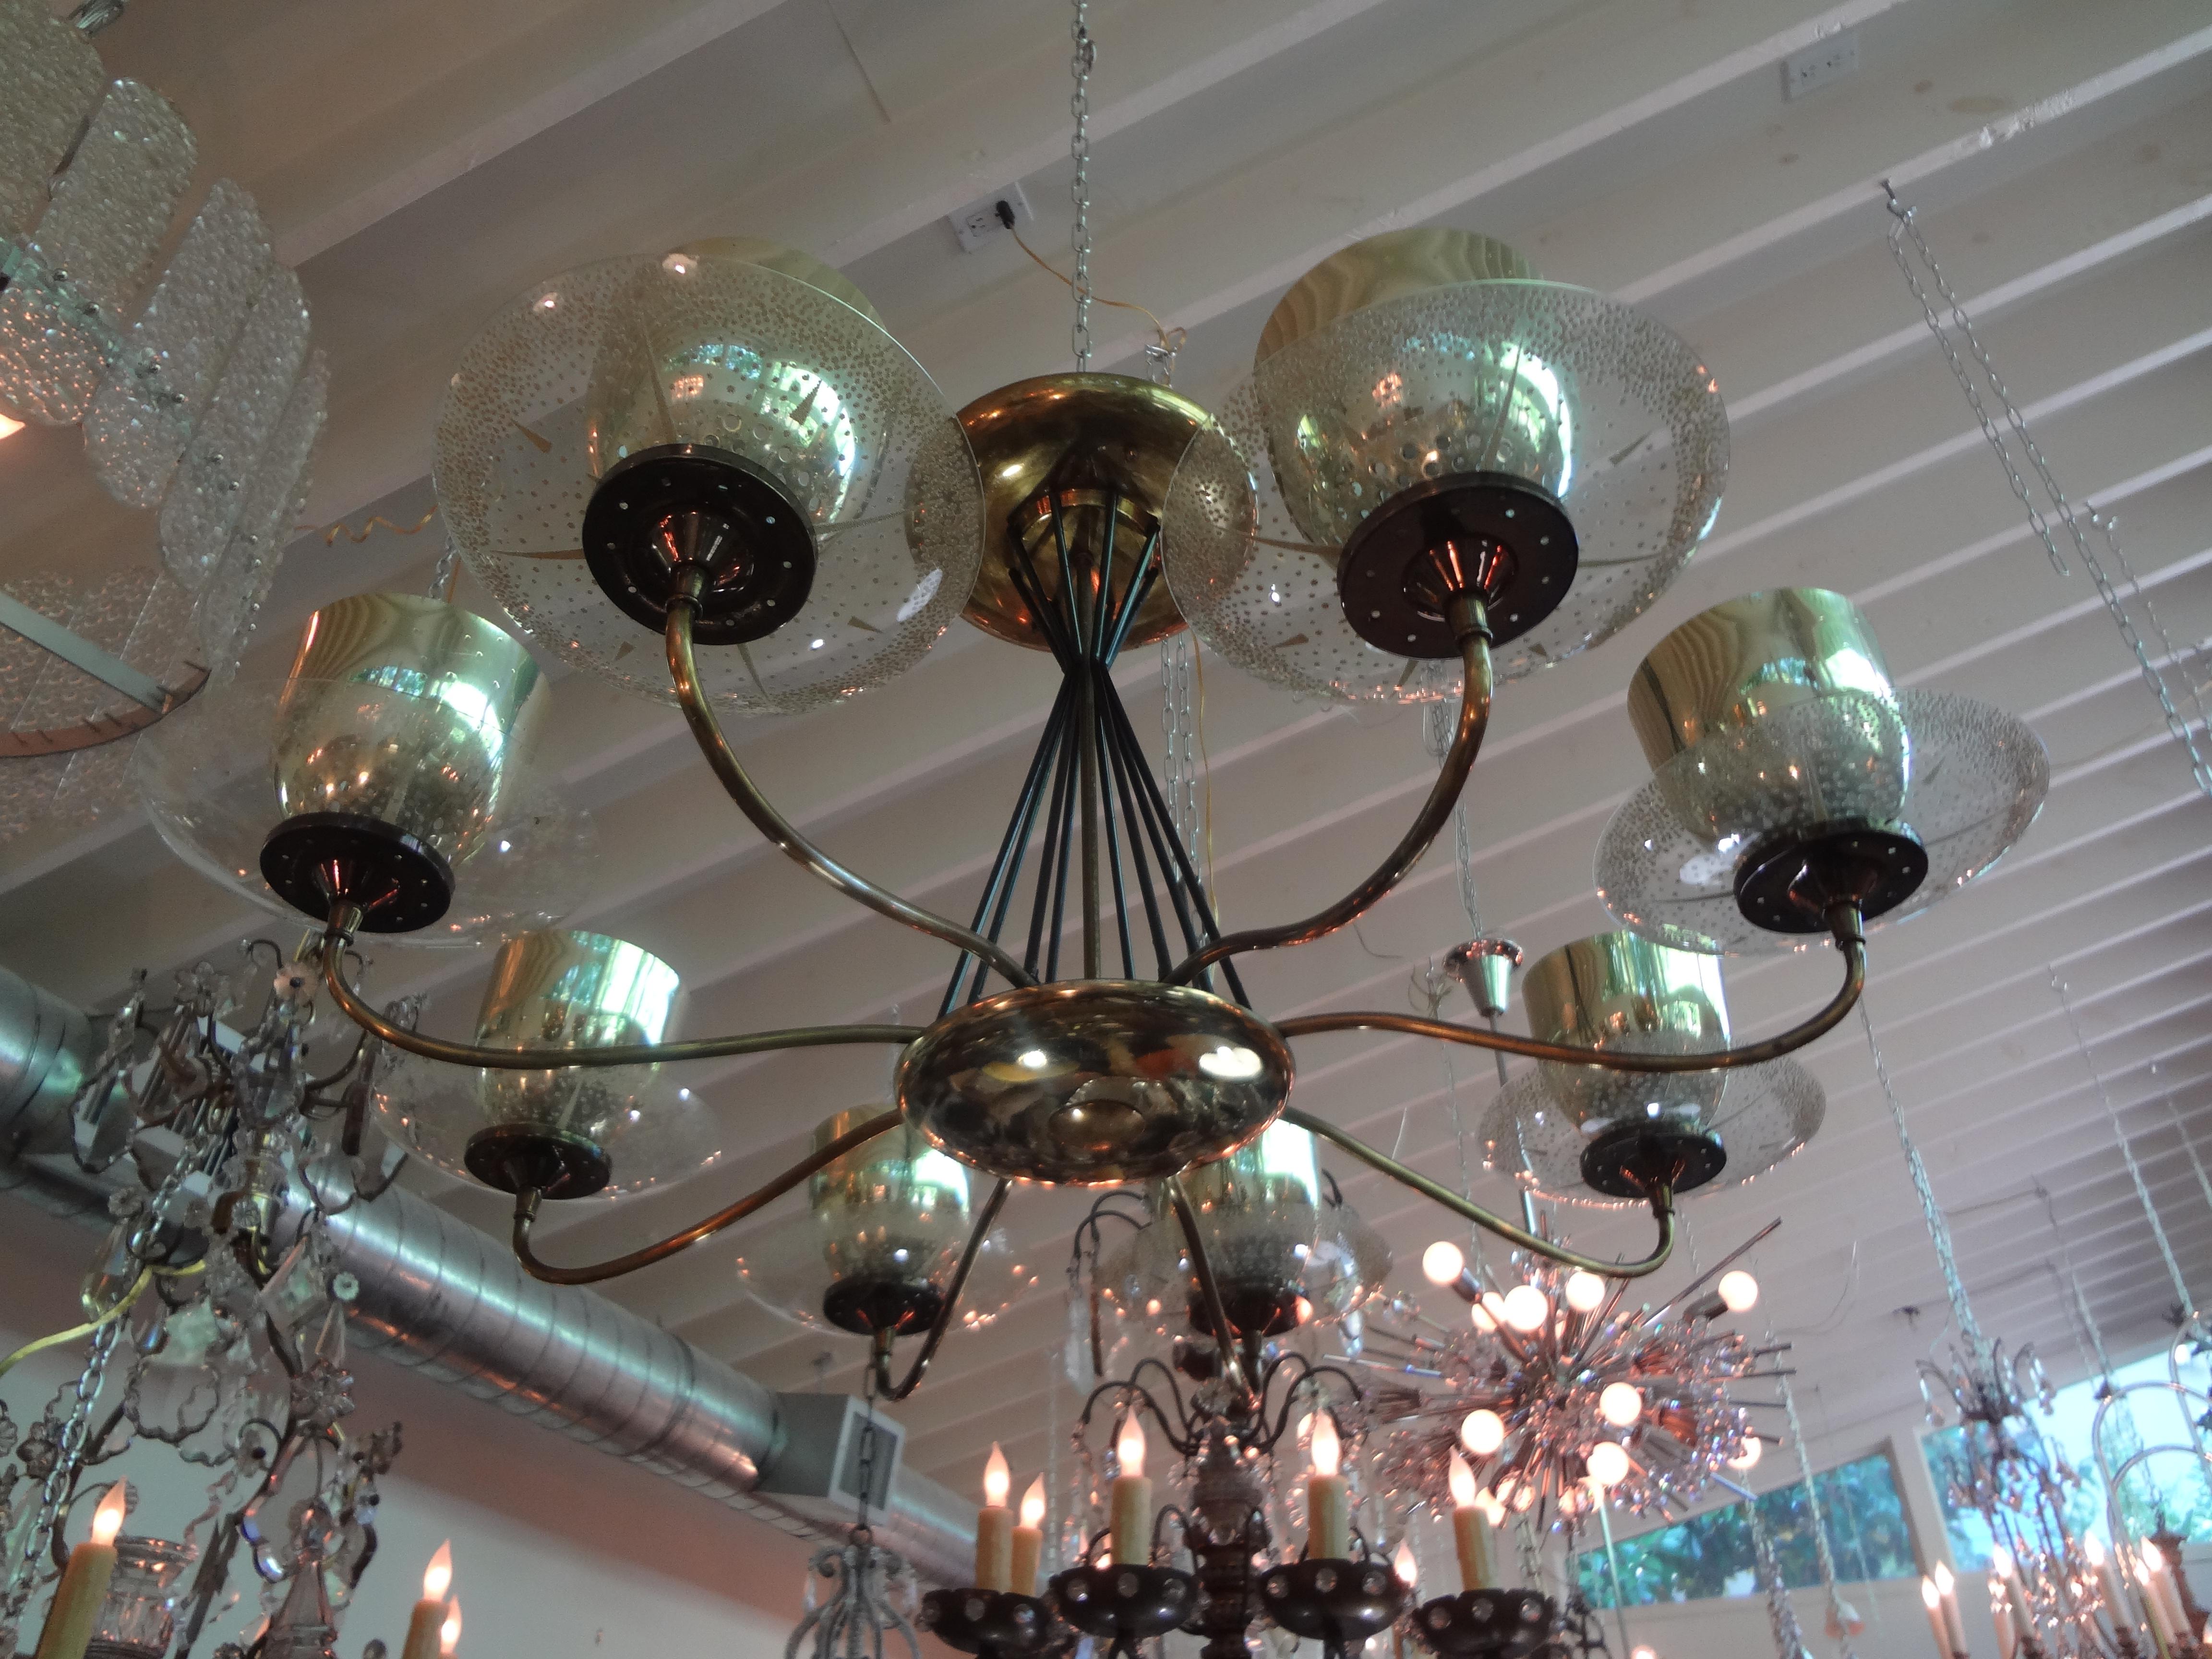 Large Gerald Thurston for Lightolier brass, Iron and glass chandelier.
Rare large Mid-Century Modern chandelier by Gerald Thurston for Lightolier. This stunning modernist chandelier is comprised of a brass and iron frame, large glass bobeches and